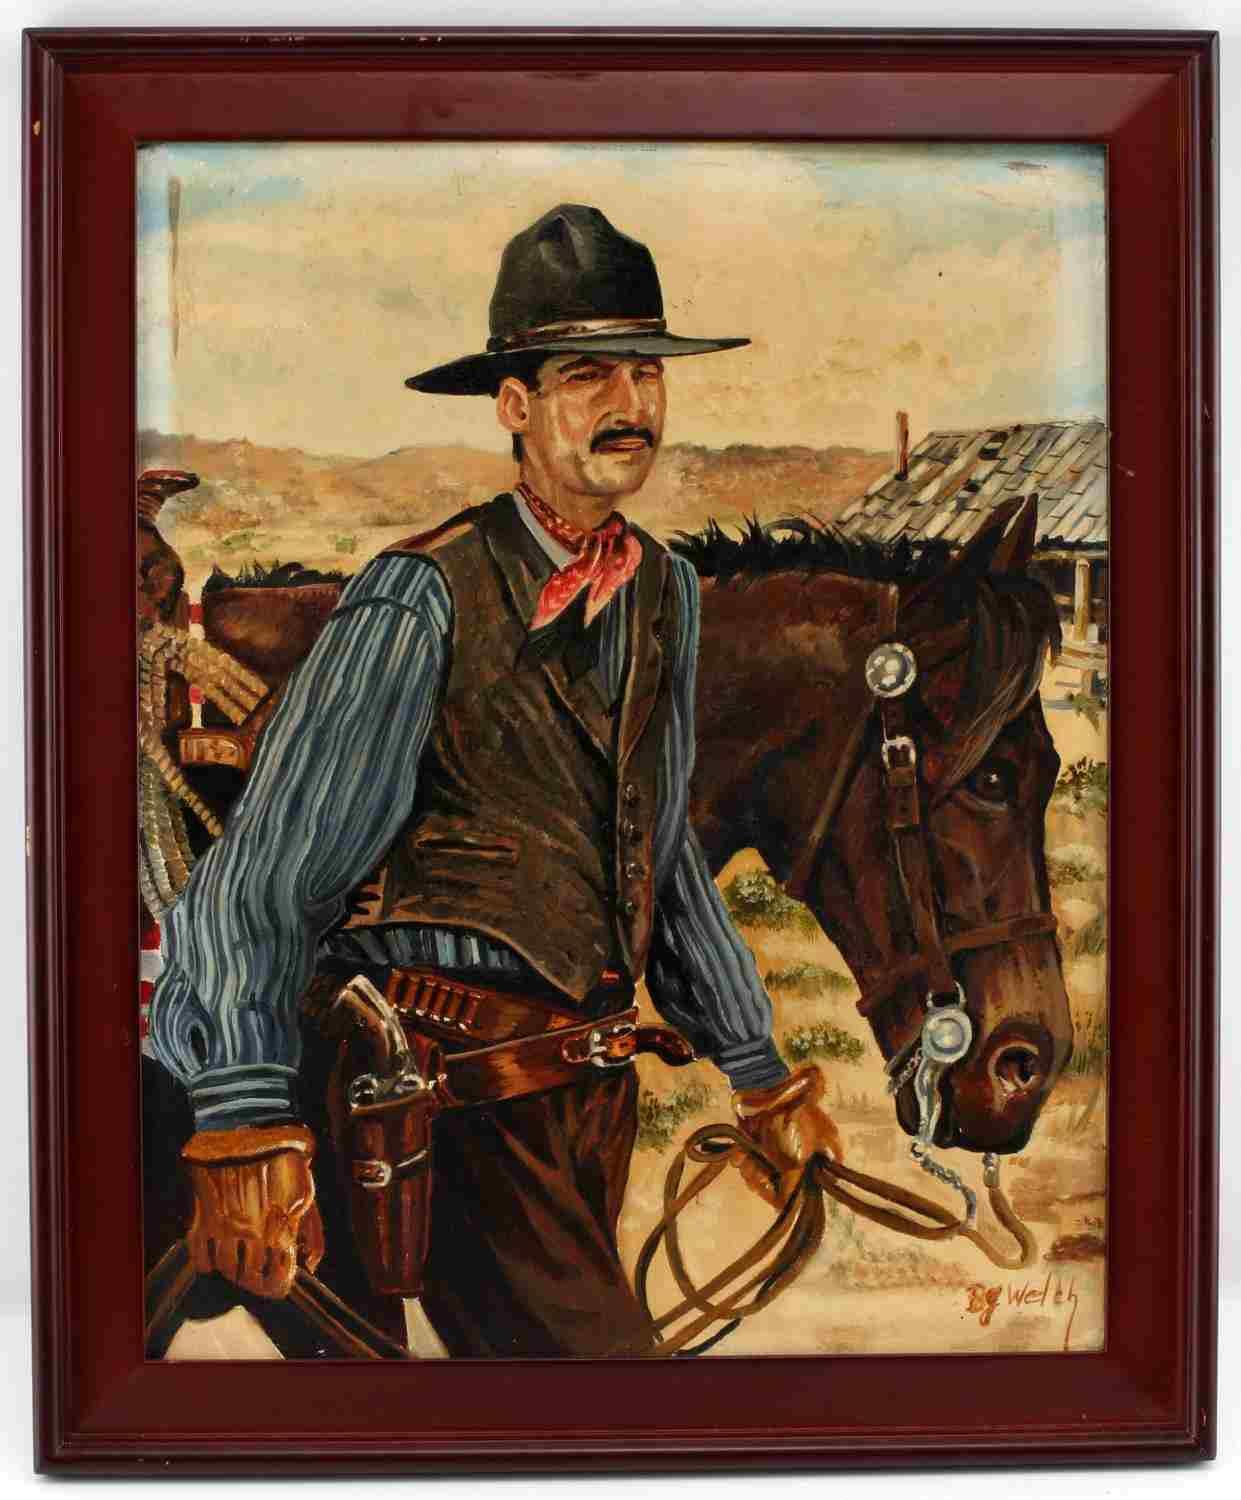 OIL ON CANVAS FRAMED PAINTING OF COWBOY AND HORSE